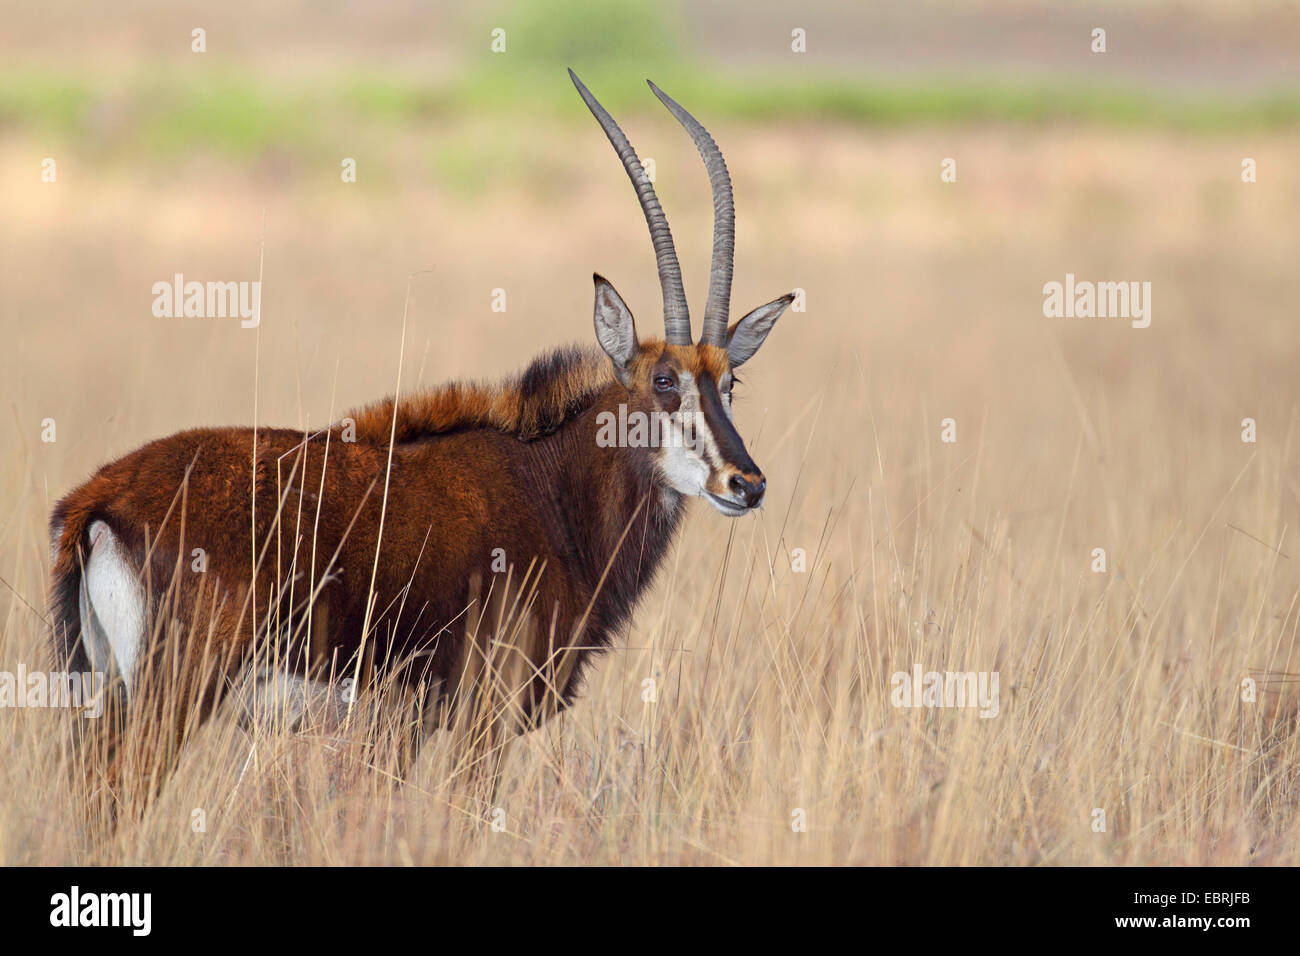 South African Sable Antelope (Hippotragus niger niger), female in savannah, South Africa, Kgaswane Mountain Reserve Stock Photo